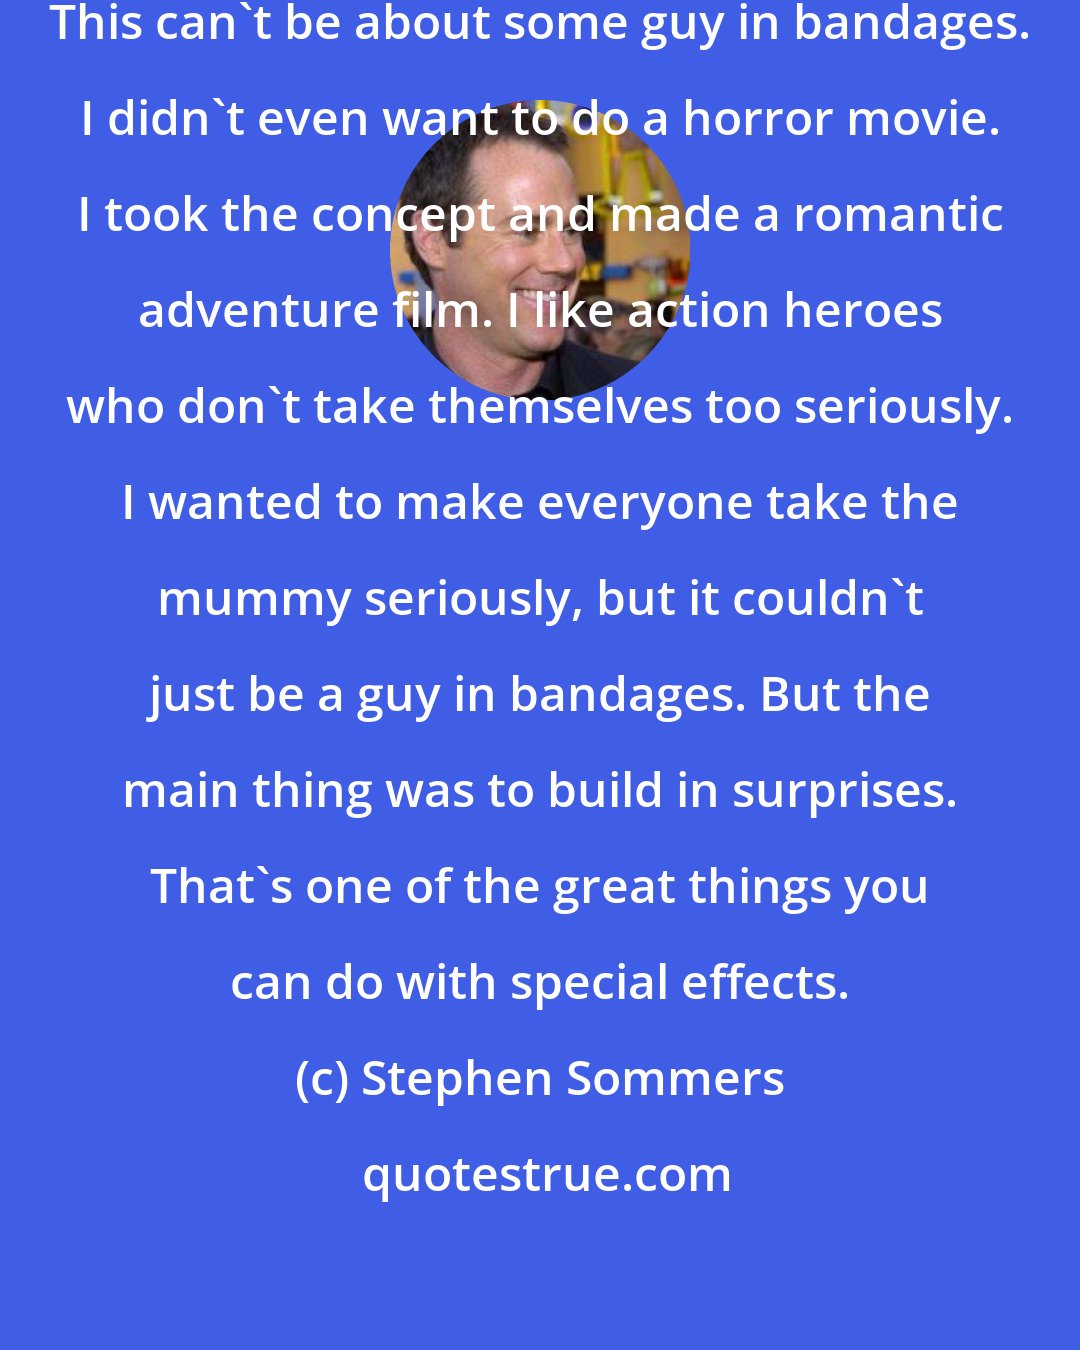 Stephen Sommers: I went in right up front and said, This can't be about some guy in bandages. I didn't even want to do a horror movie. I took the concept and made a romantic adventure film. I like action heroes who don't take themselves too seriously. I wanted to make everyone take the mummy seriously, but it couldn't just be a guy in bandages. But the main thing was to build in surprises. That's one of the great things you can do with special effects.